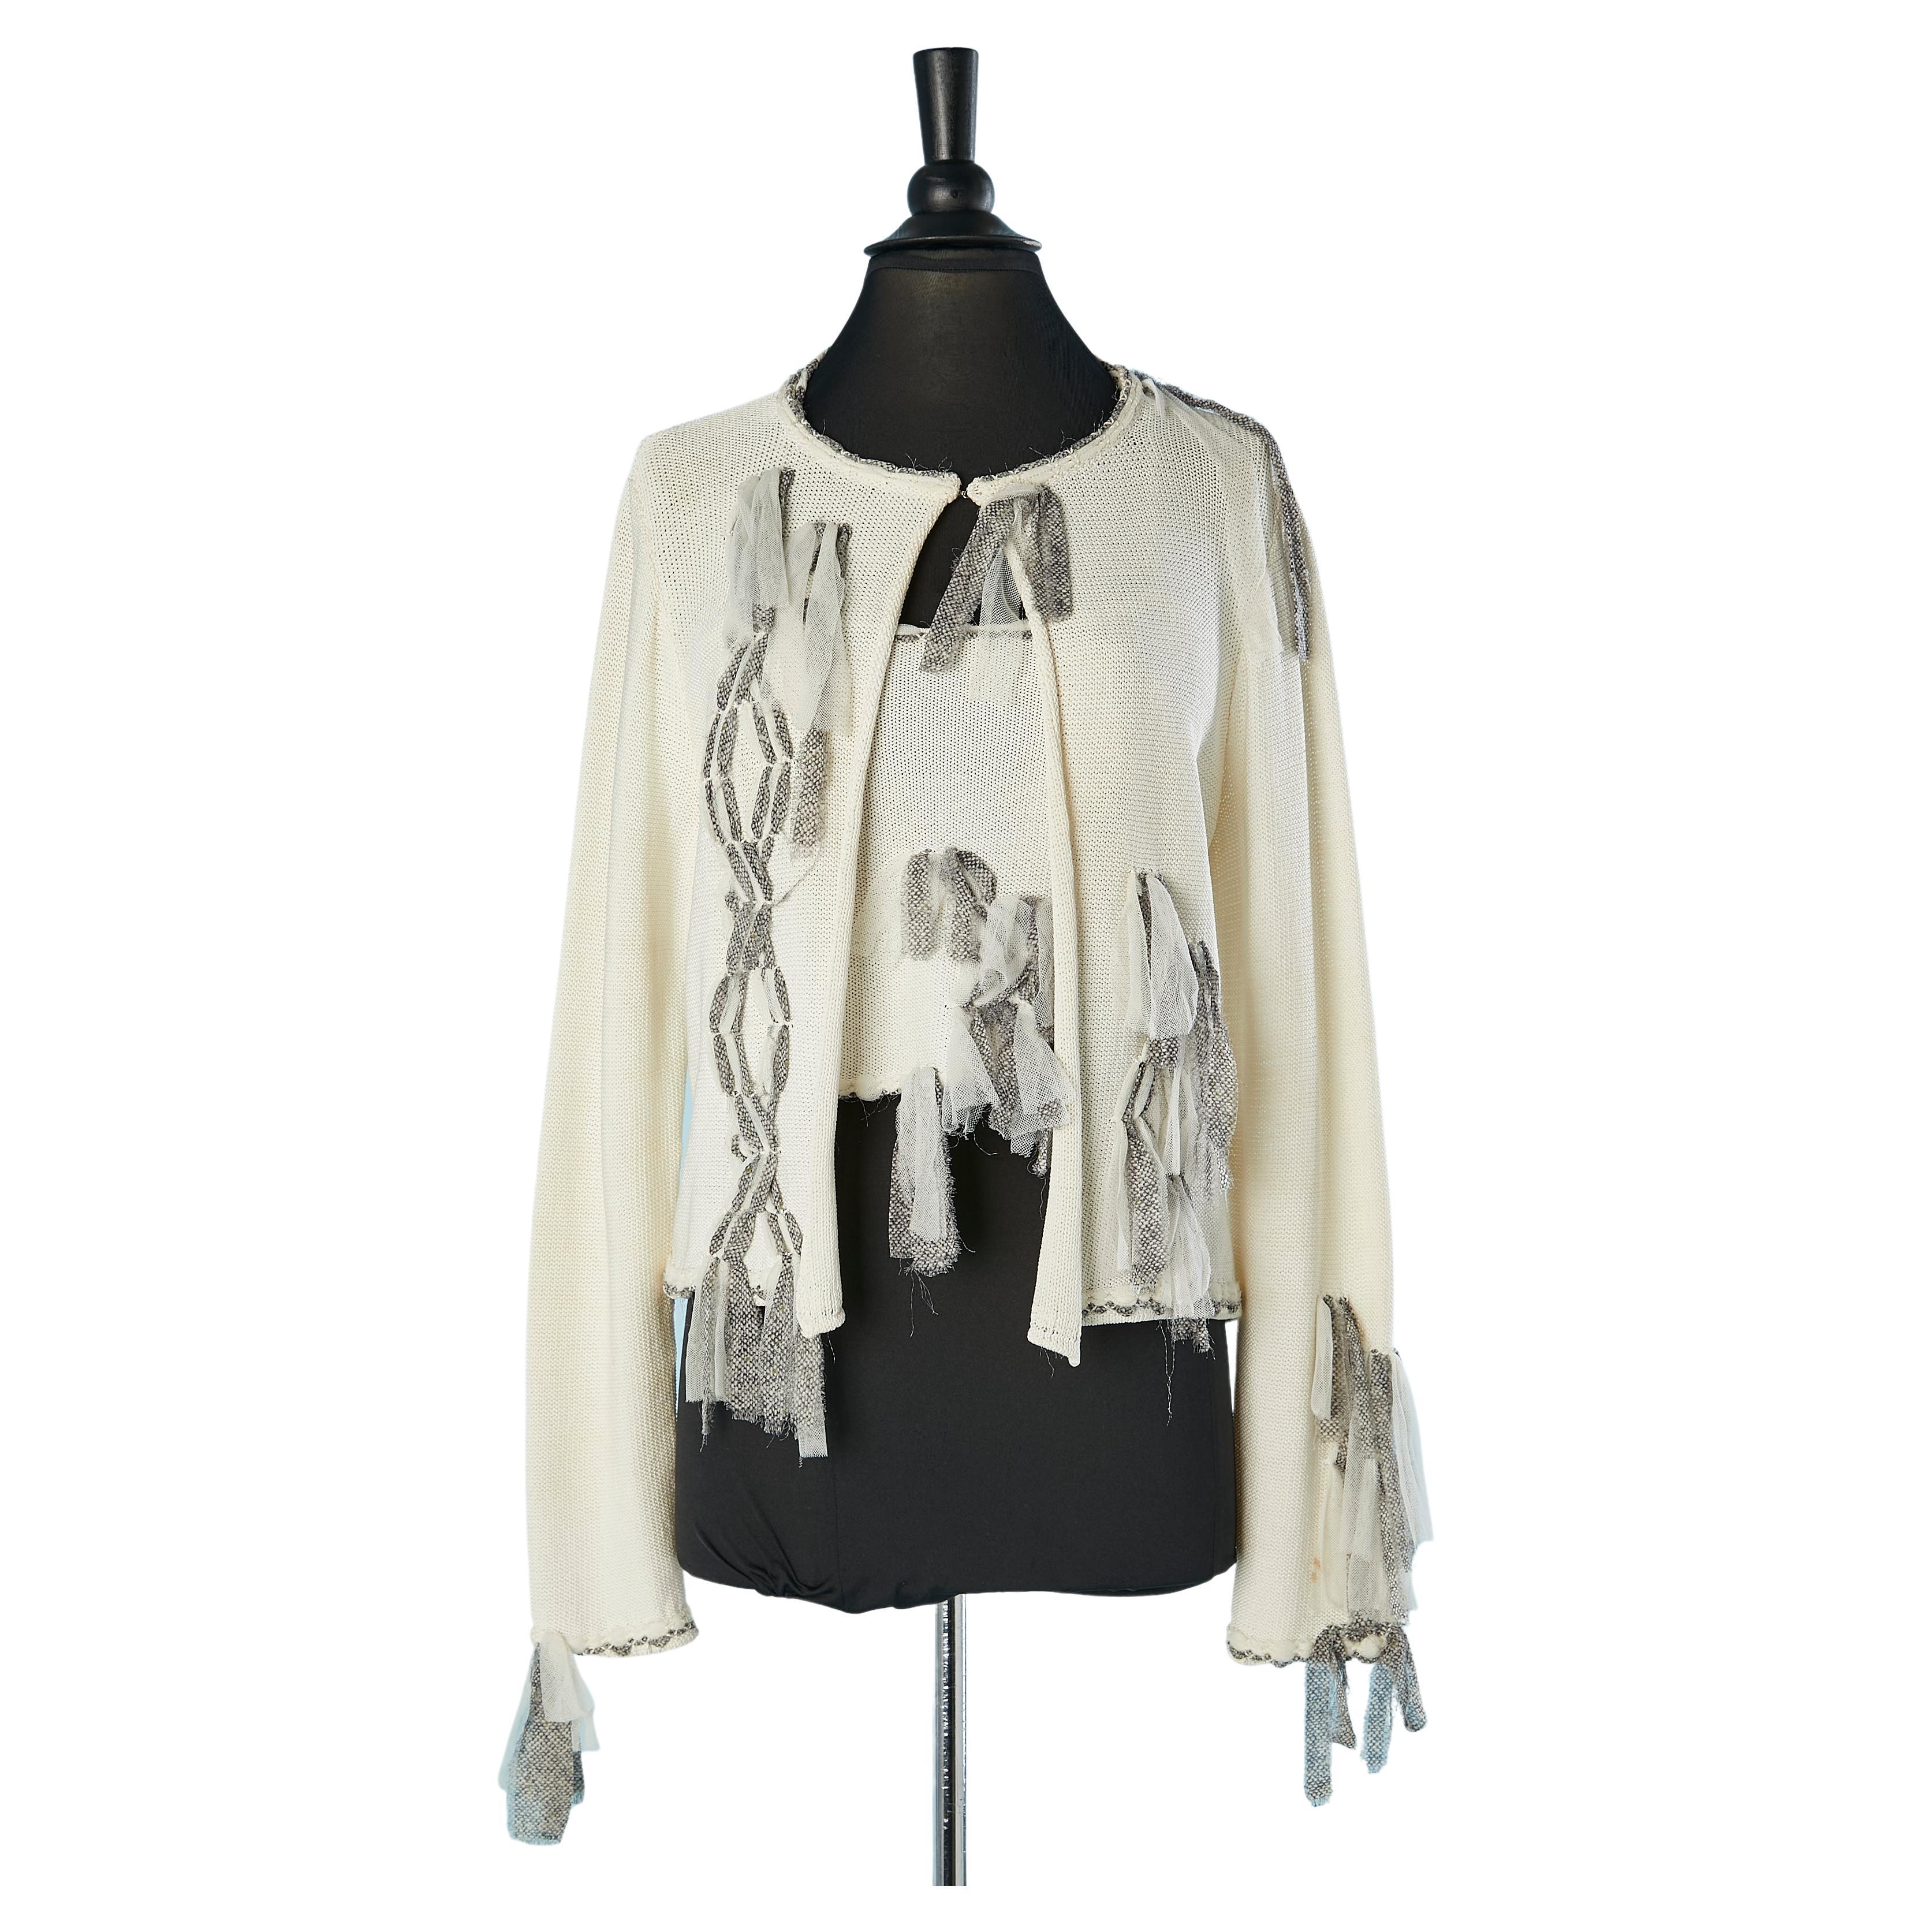 Off-white knit cardigan and bustier ensemble Christian Dior Boutique 